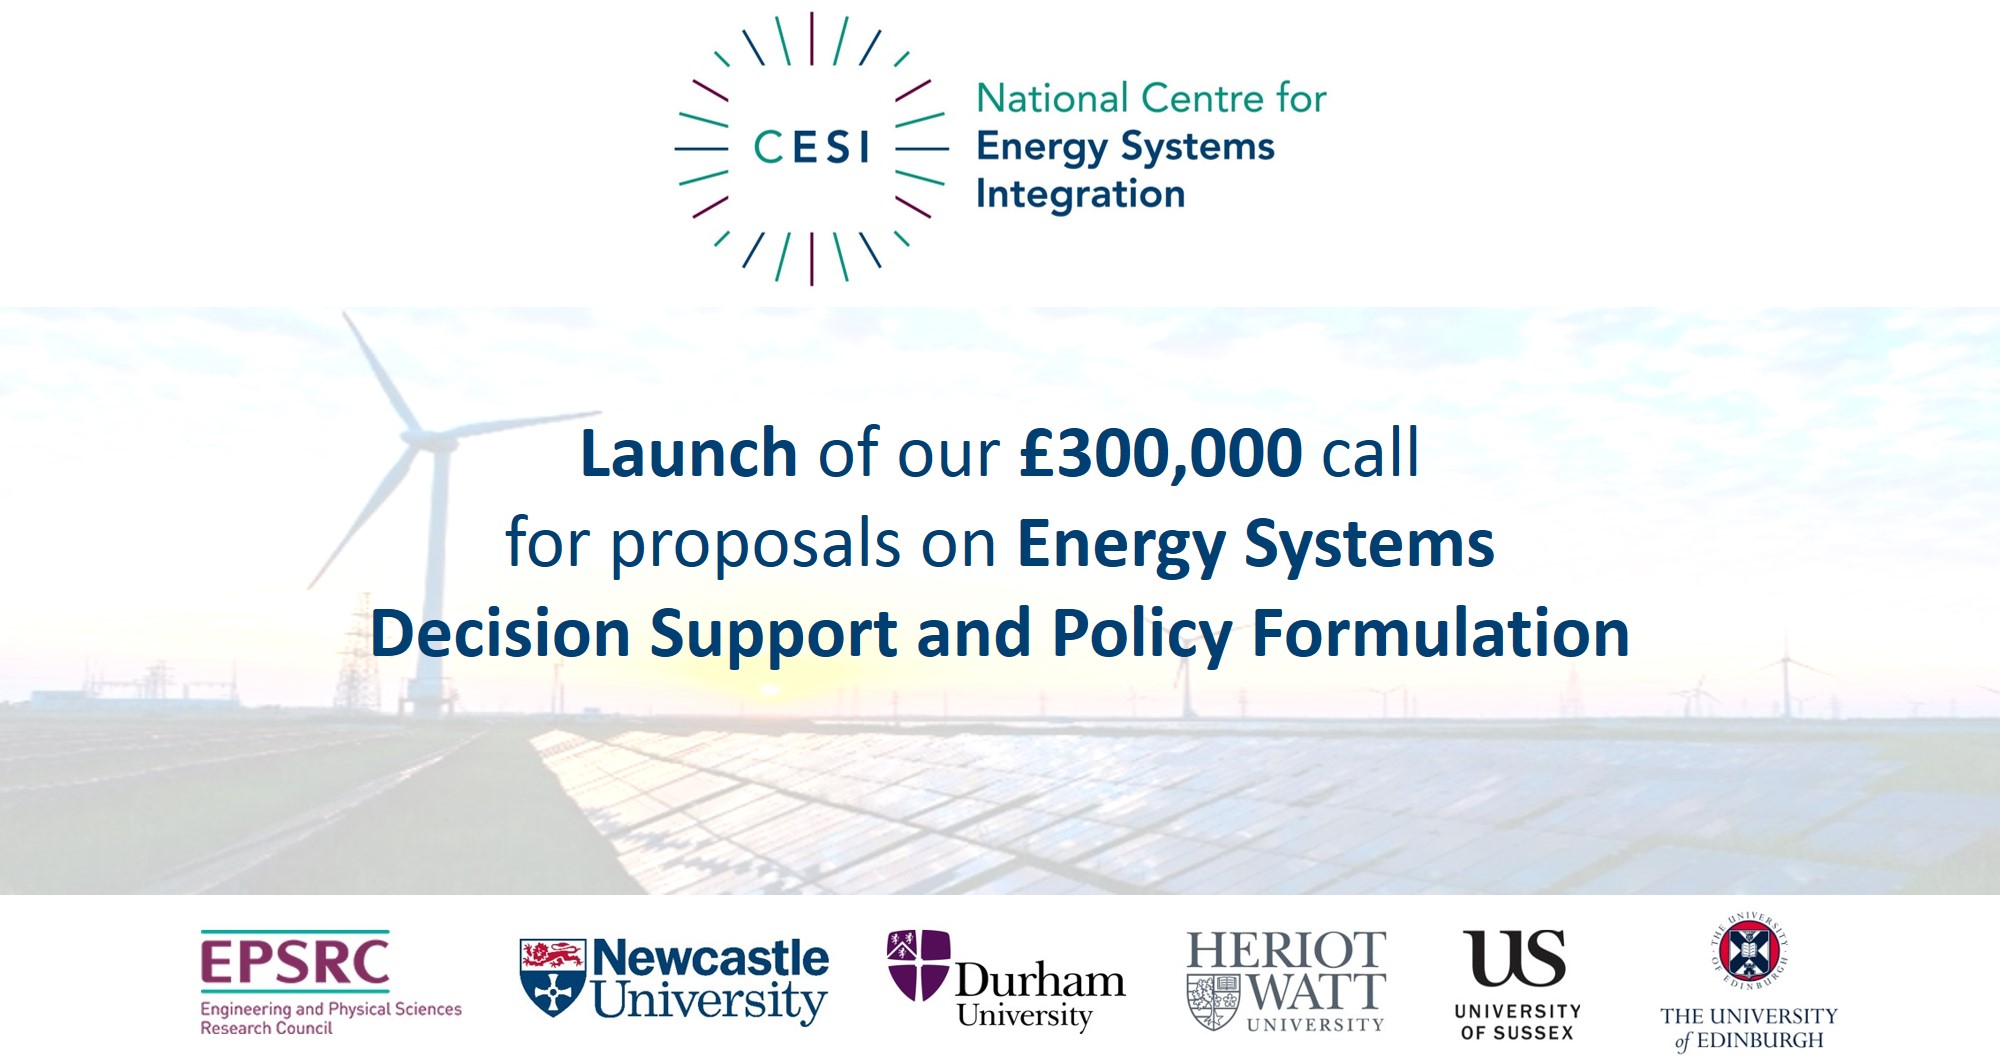 CESI Directed Call Launch on Energy Systems Decision Support and Policy Formulation